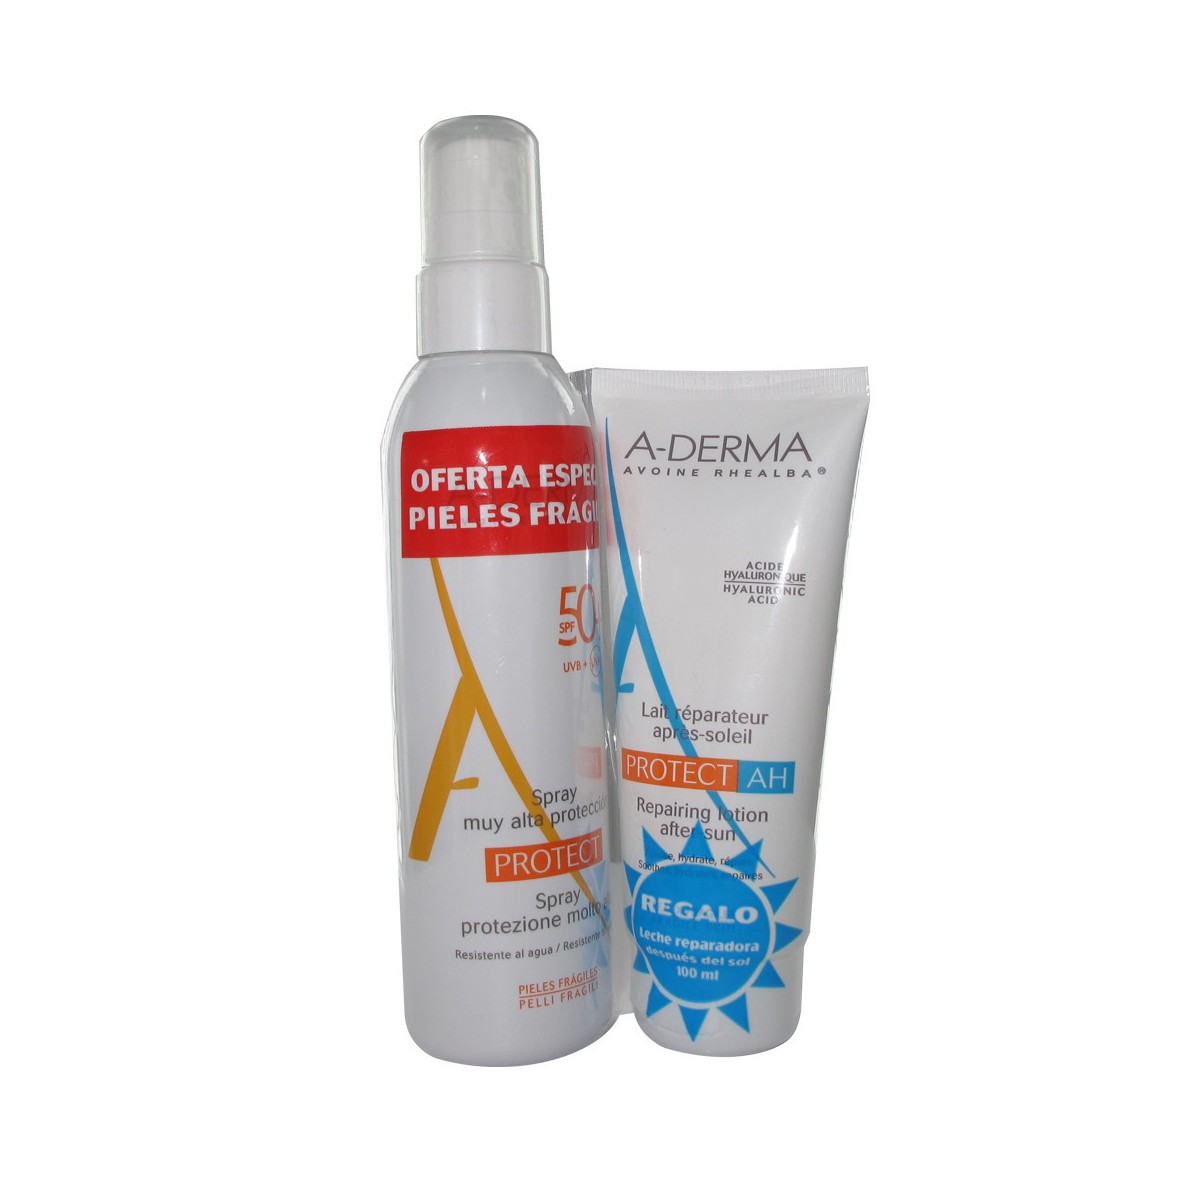 ADERMA PROTECT SPF50+ SPRAY 200ml + PROTECT LECHE aftersun